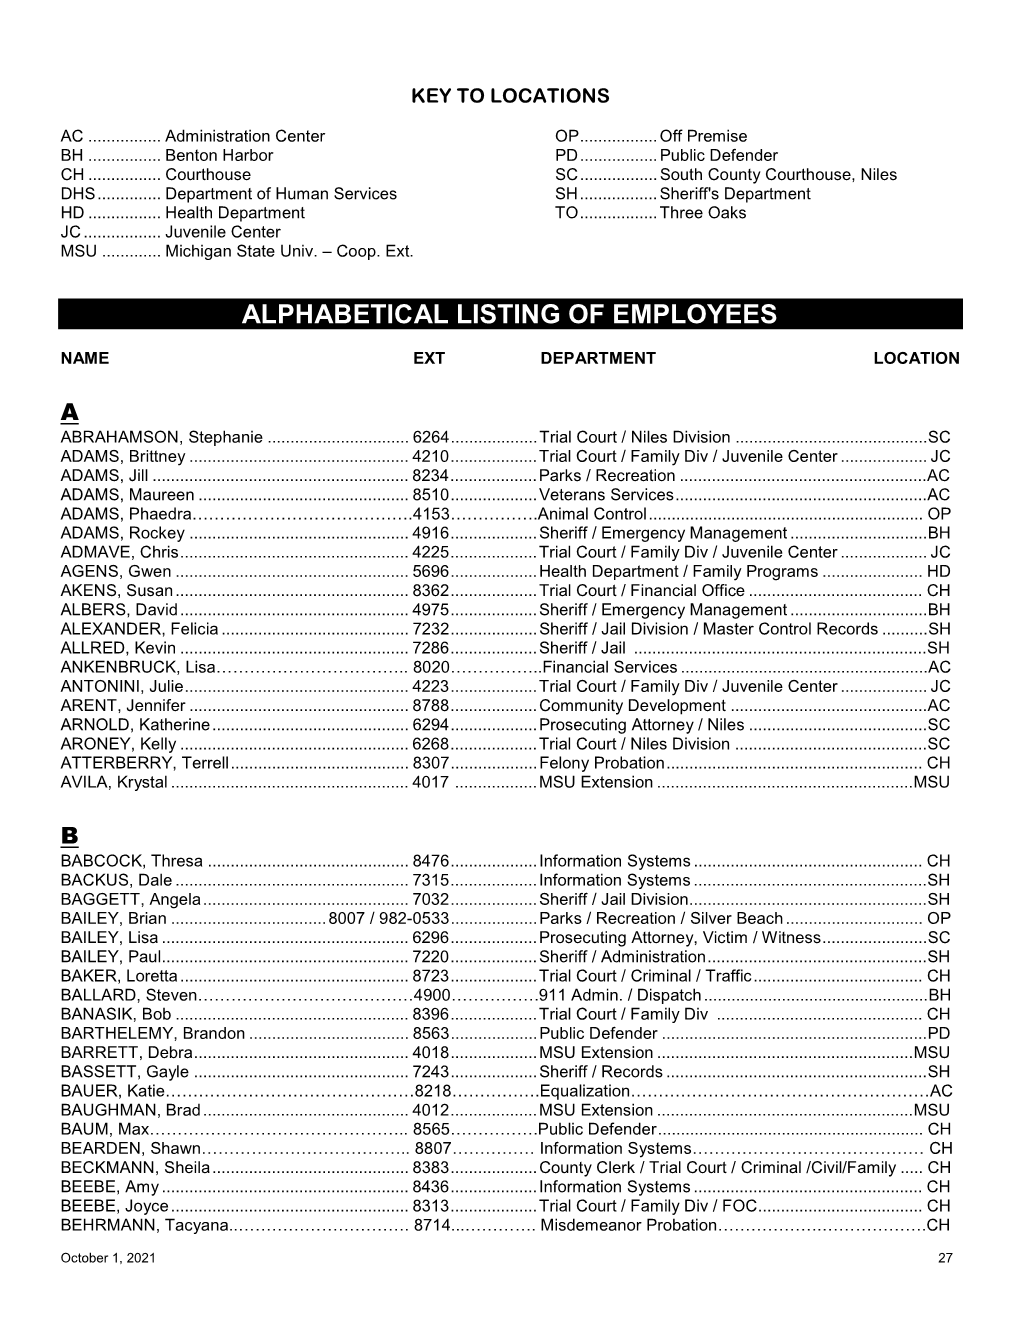 Alphabetical Listing of Employees